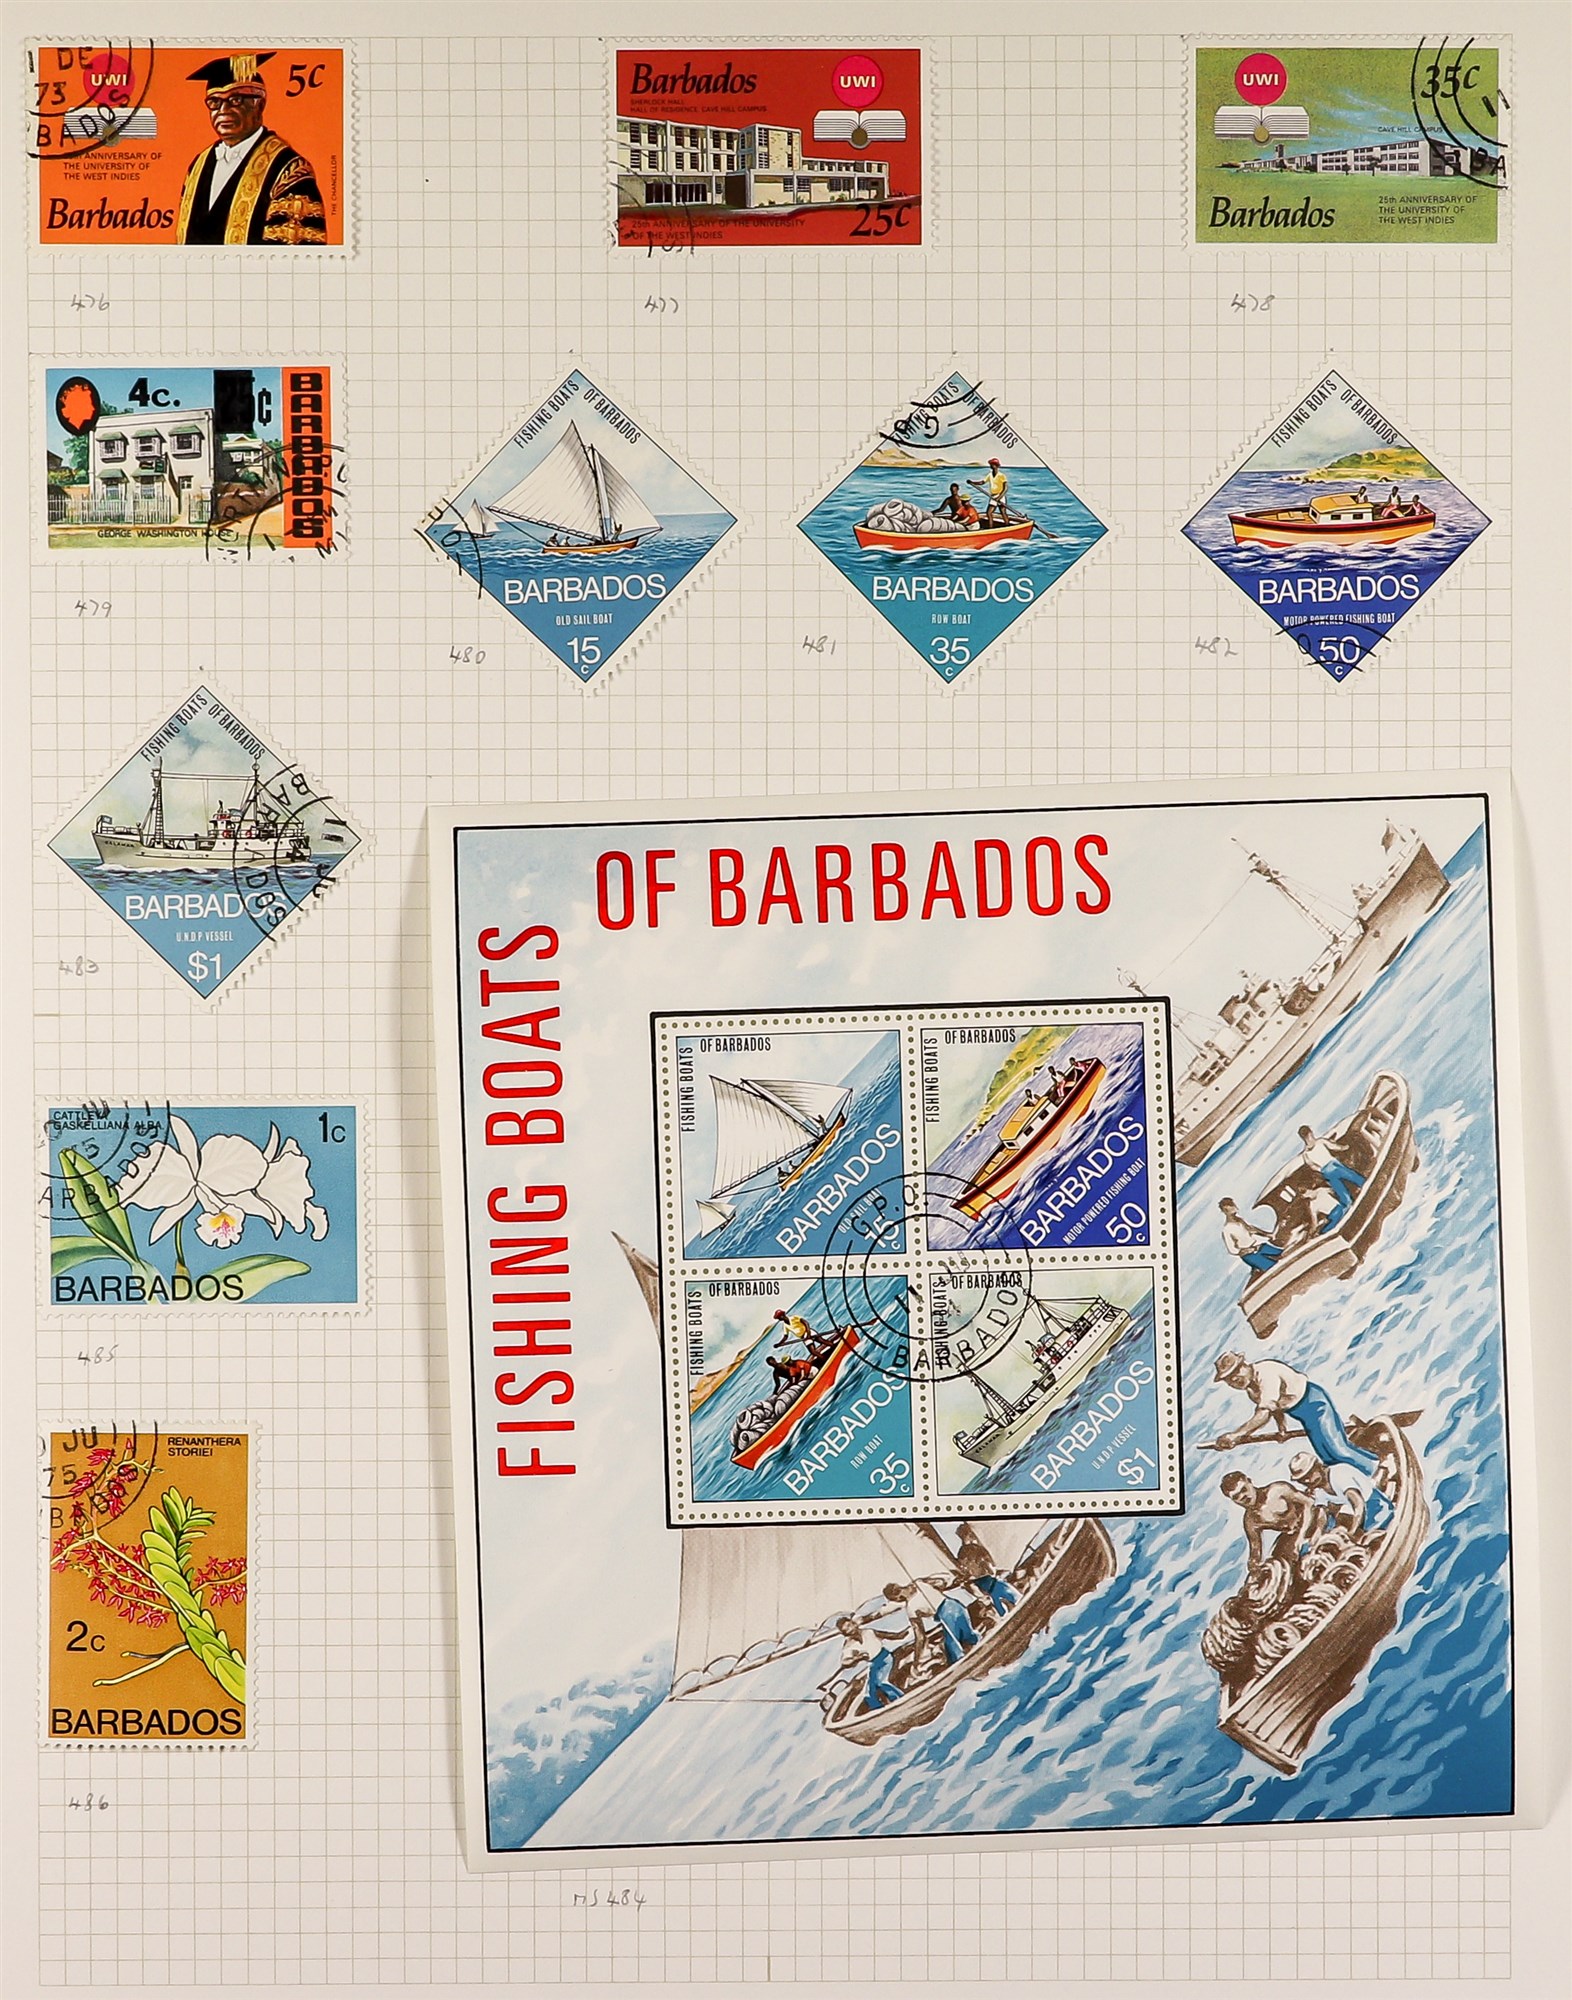 BARBADOS 1852 - 1980 USED COLLECTION of around 500 stamps & miniature sheets in album, comprehensive - Image 7 of 9